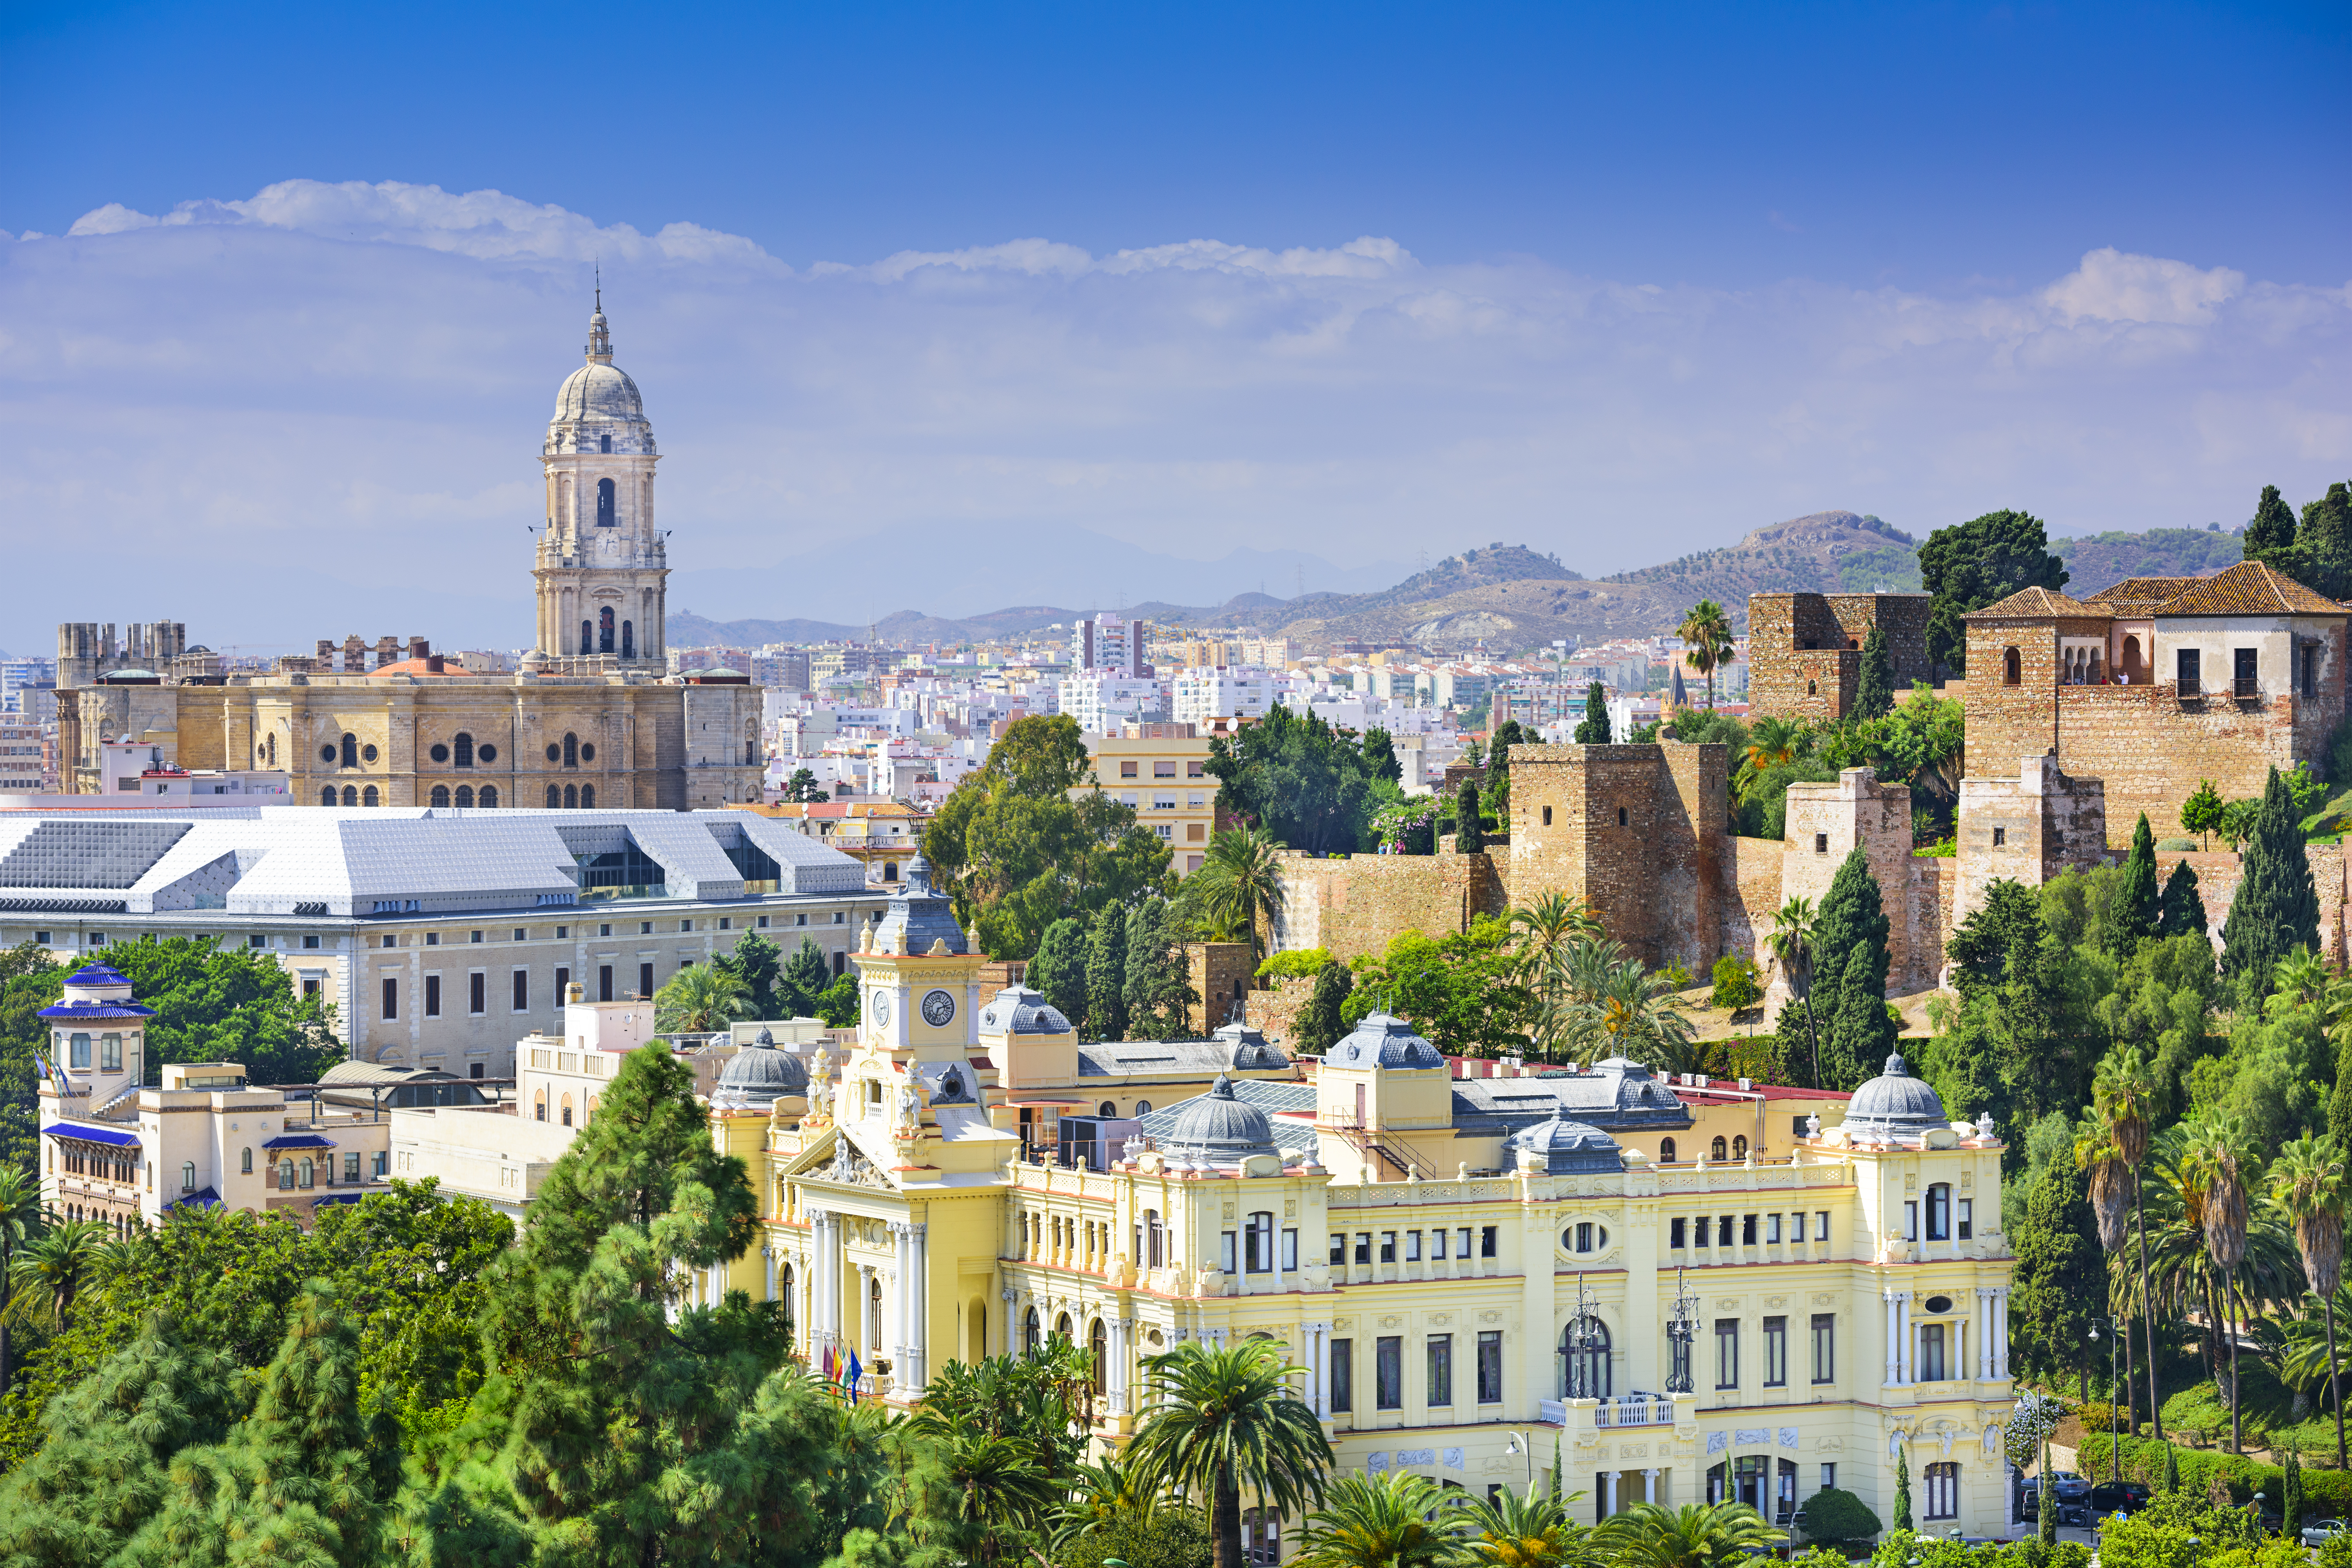 Malaga is more than worth the visit